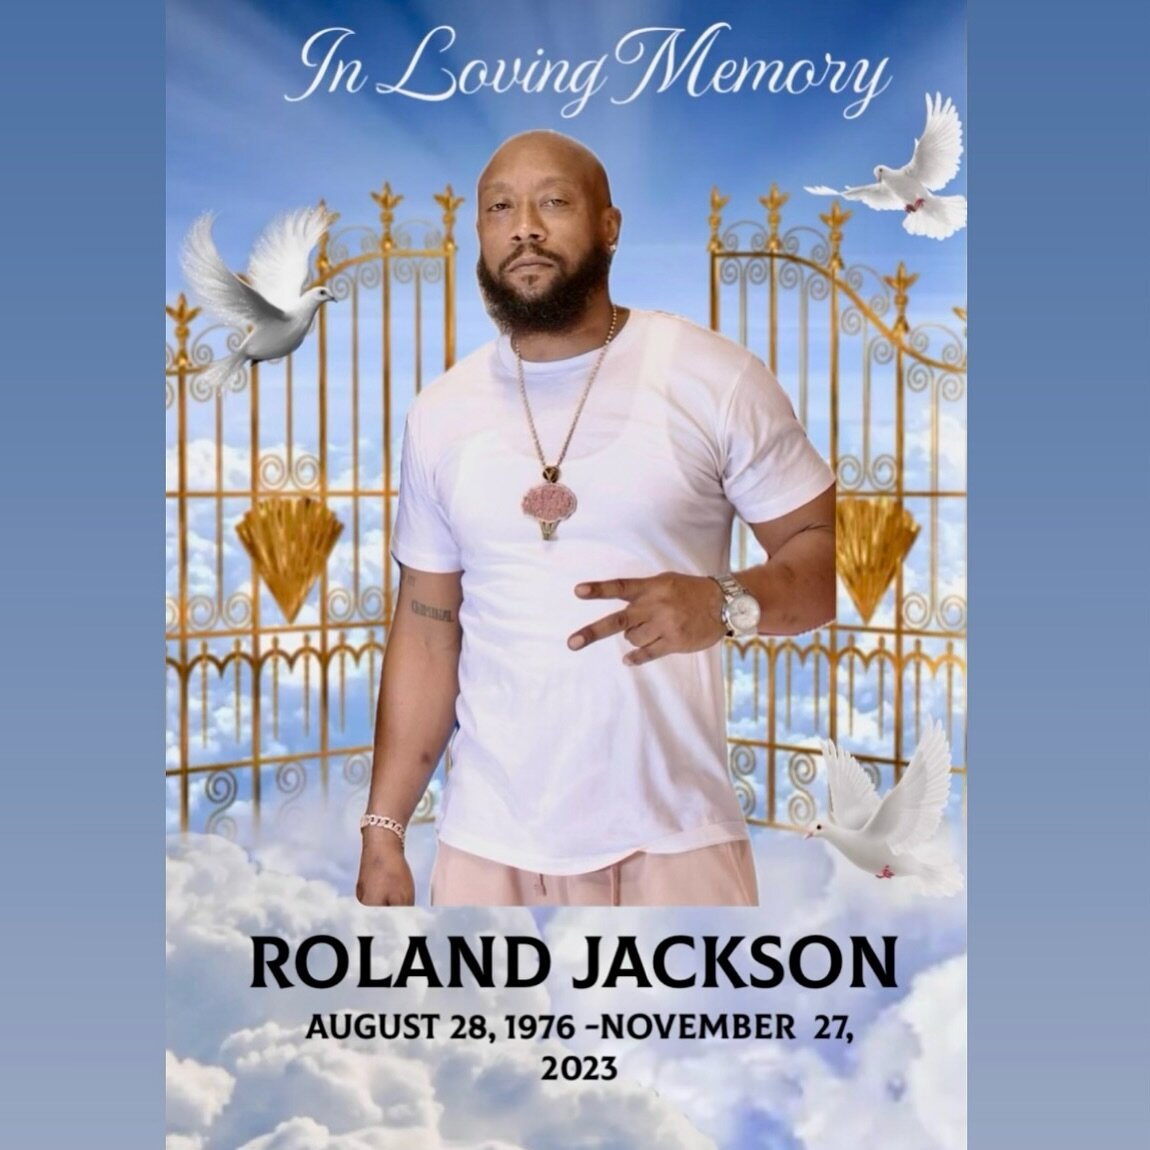 To our beloved owner: [ Roland Jackson ]

Thank you for pouring into the community and showcasing what it means to be a leader. You created a legacy and many traditions that will now live on through all of us. We will honor you by continuing the work